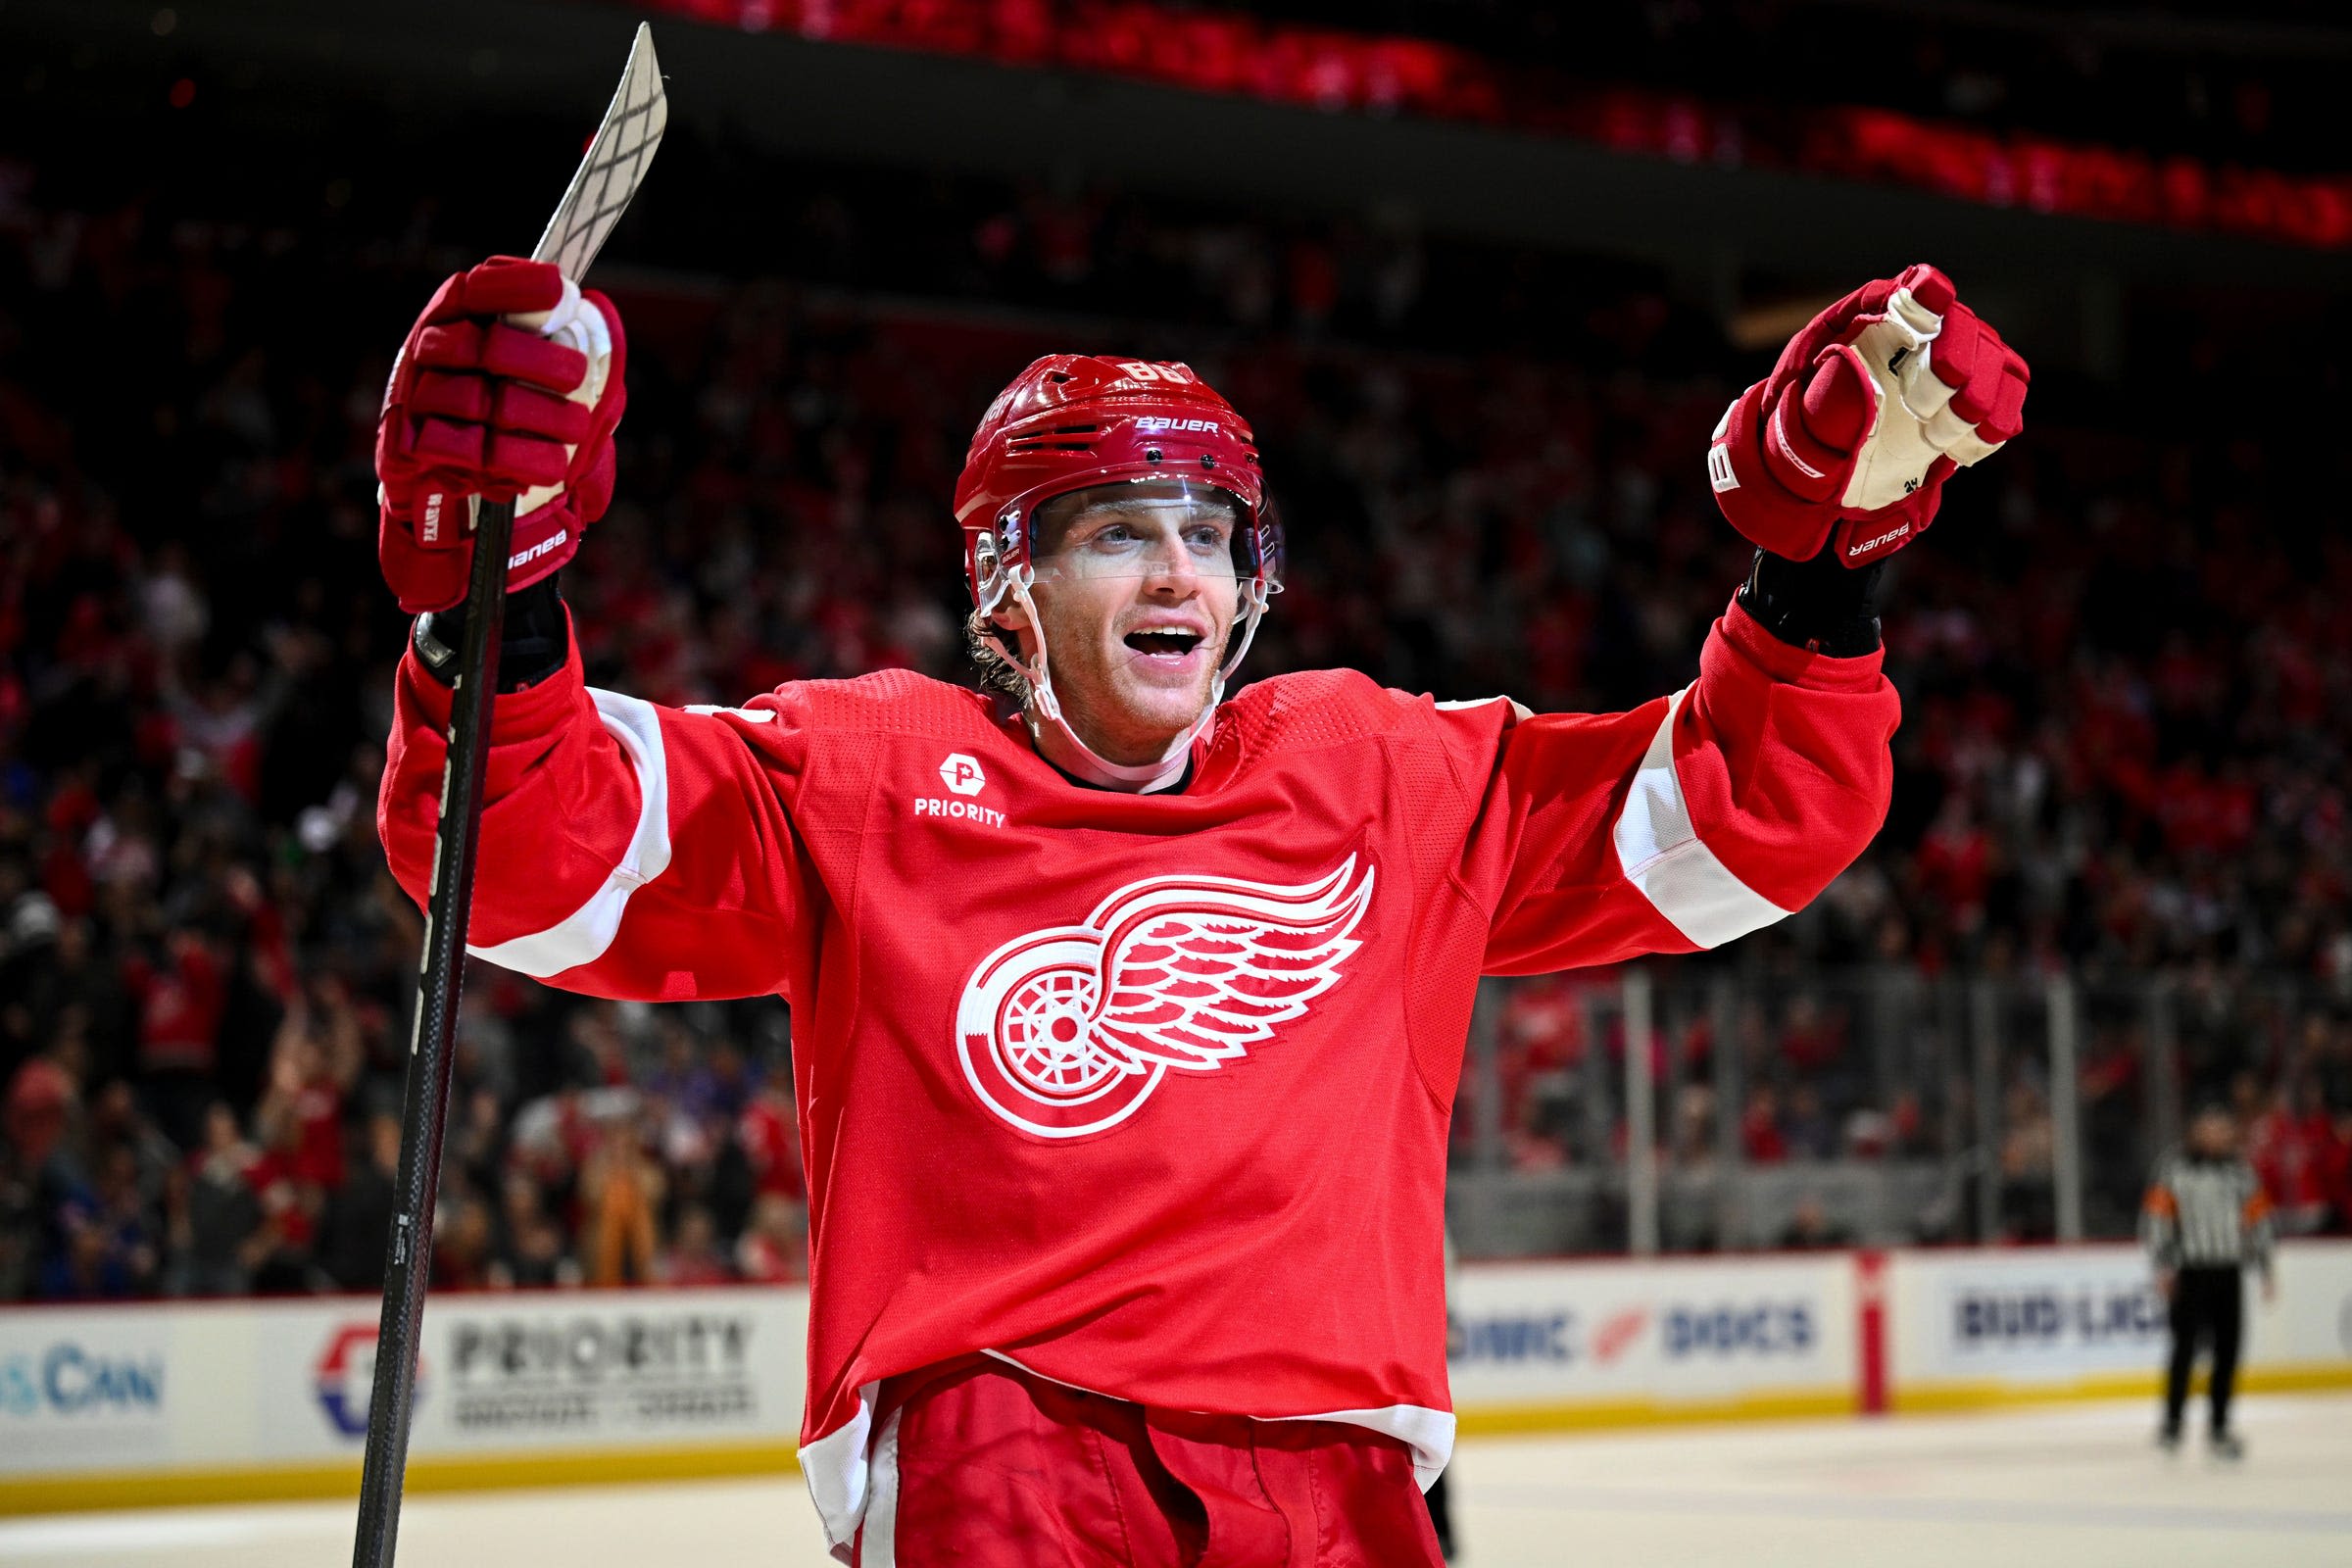 Steve Yzerman's message that prompted Patrick Kane to stay with Detroit Red Wings